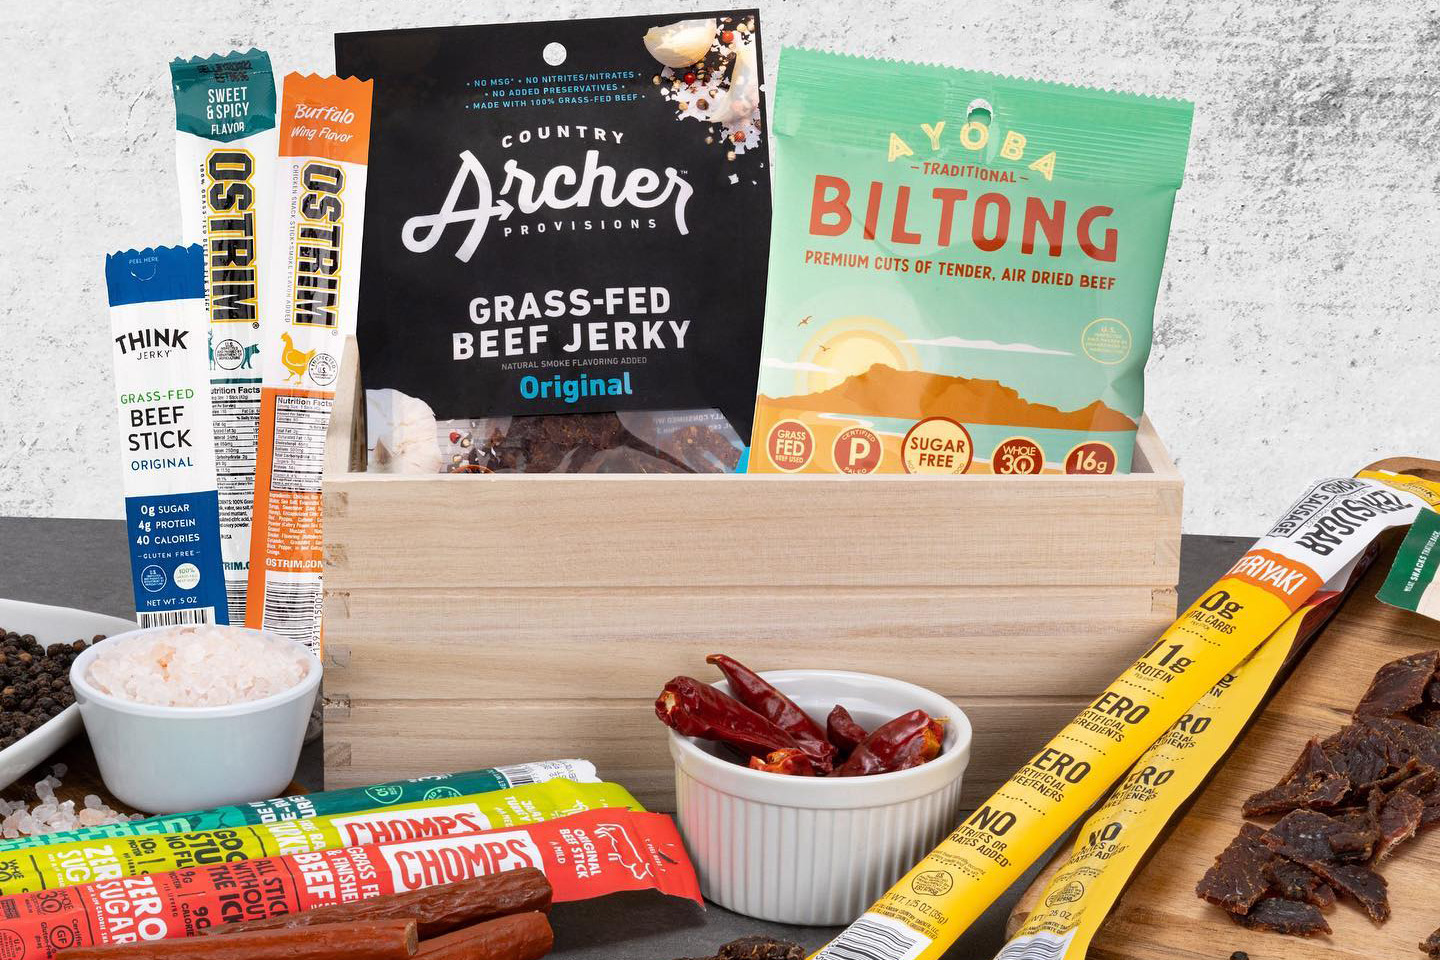 The Best Keto Gift Baskets You Can Order on  - Men's Journal